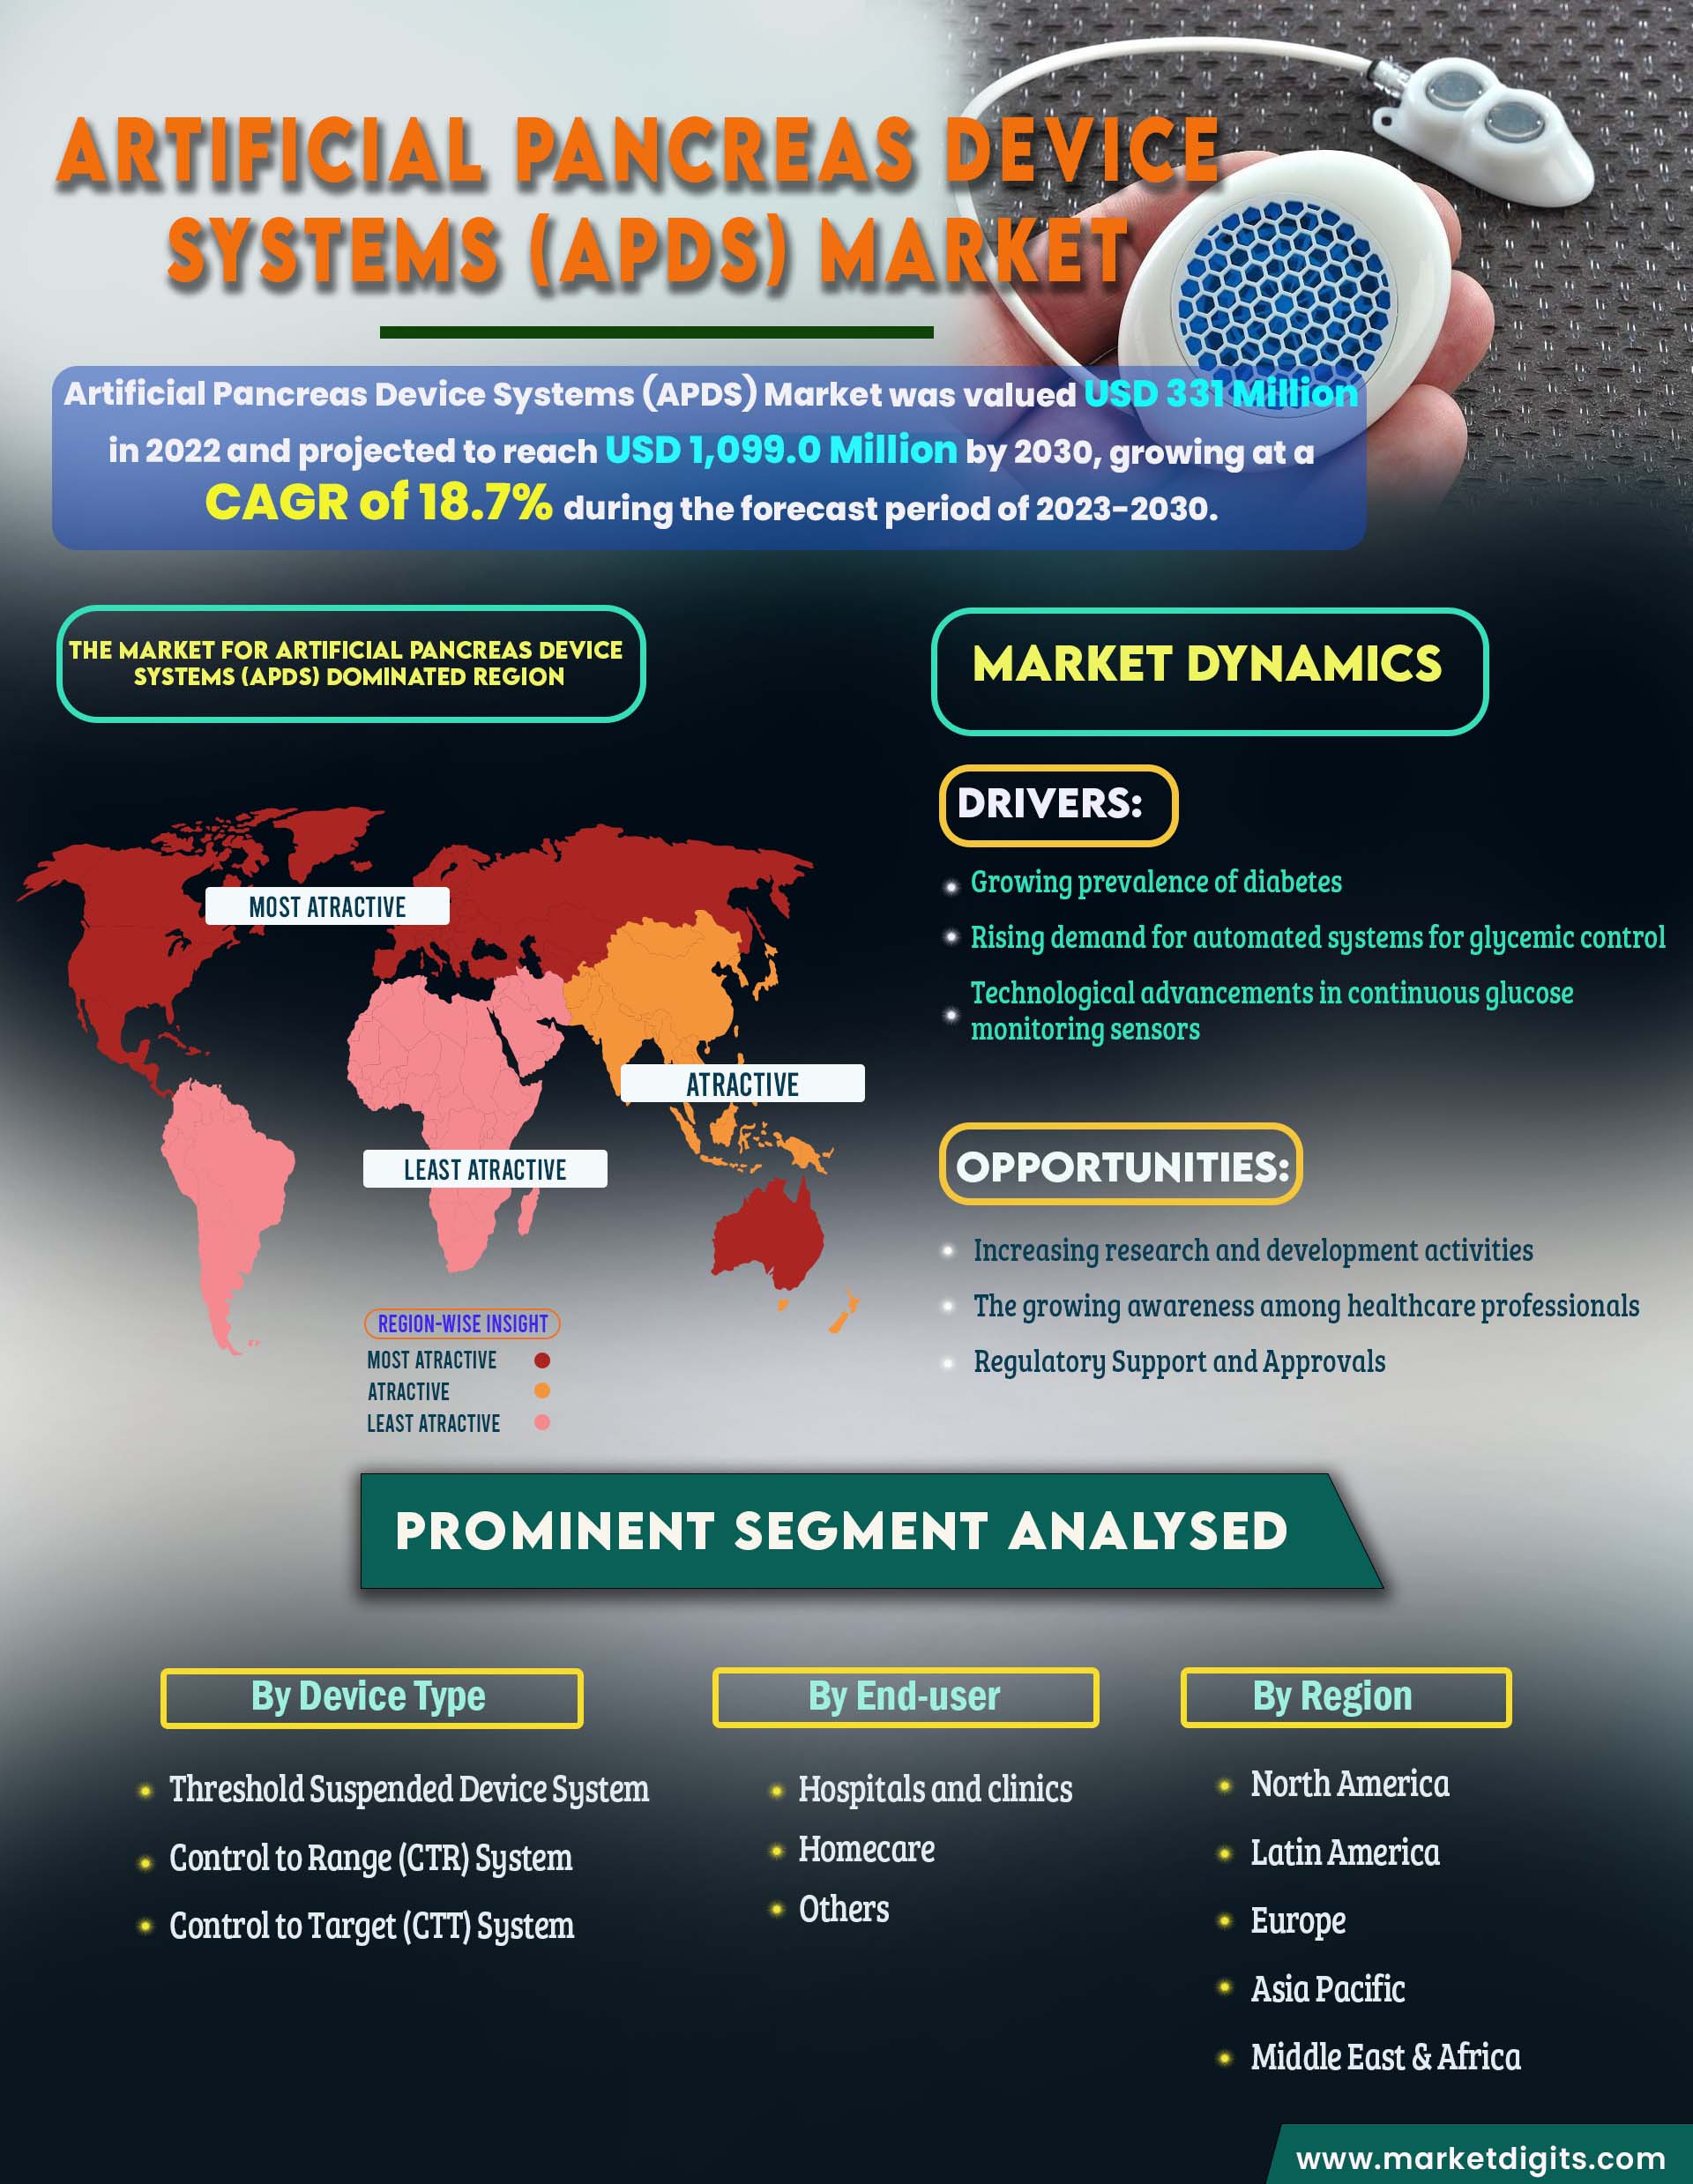 Artificial Pancreas Device Systems (APDS) Market